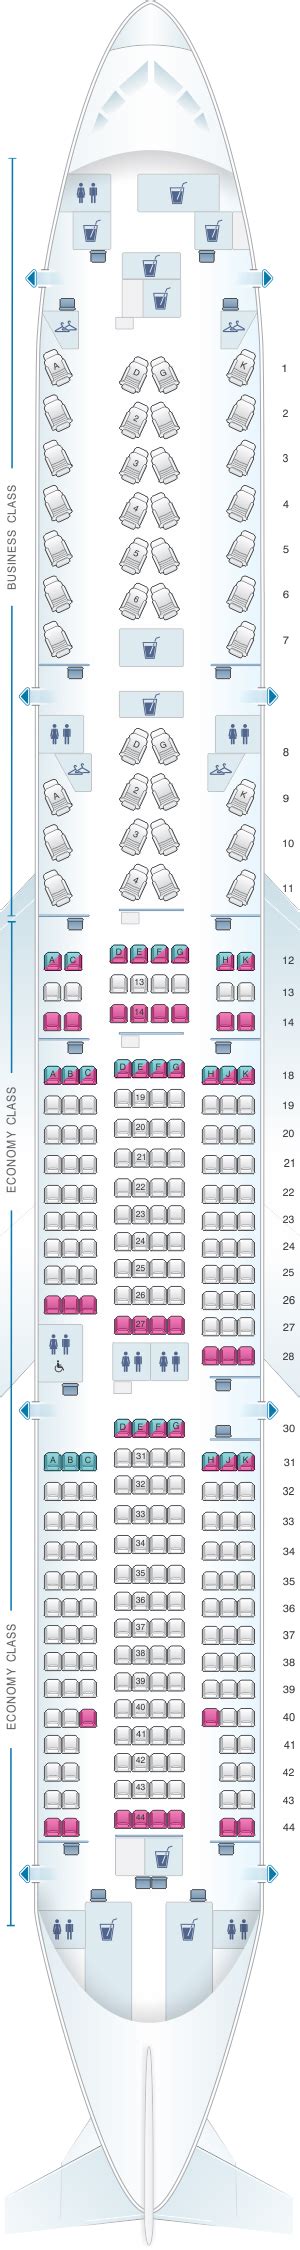 Boeing Lr Seating Chart